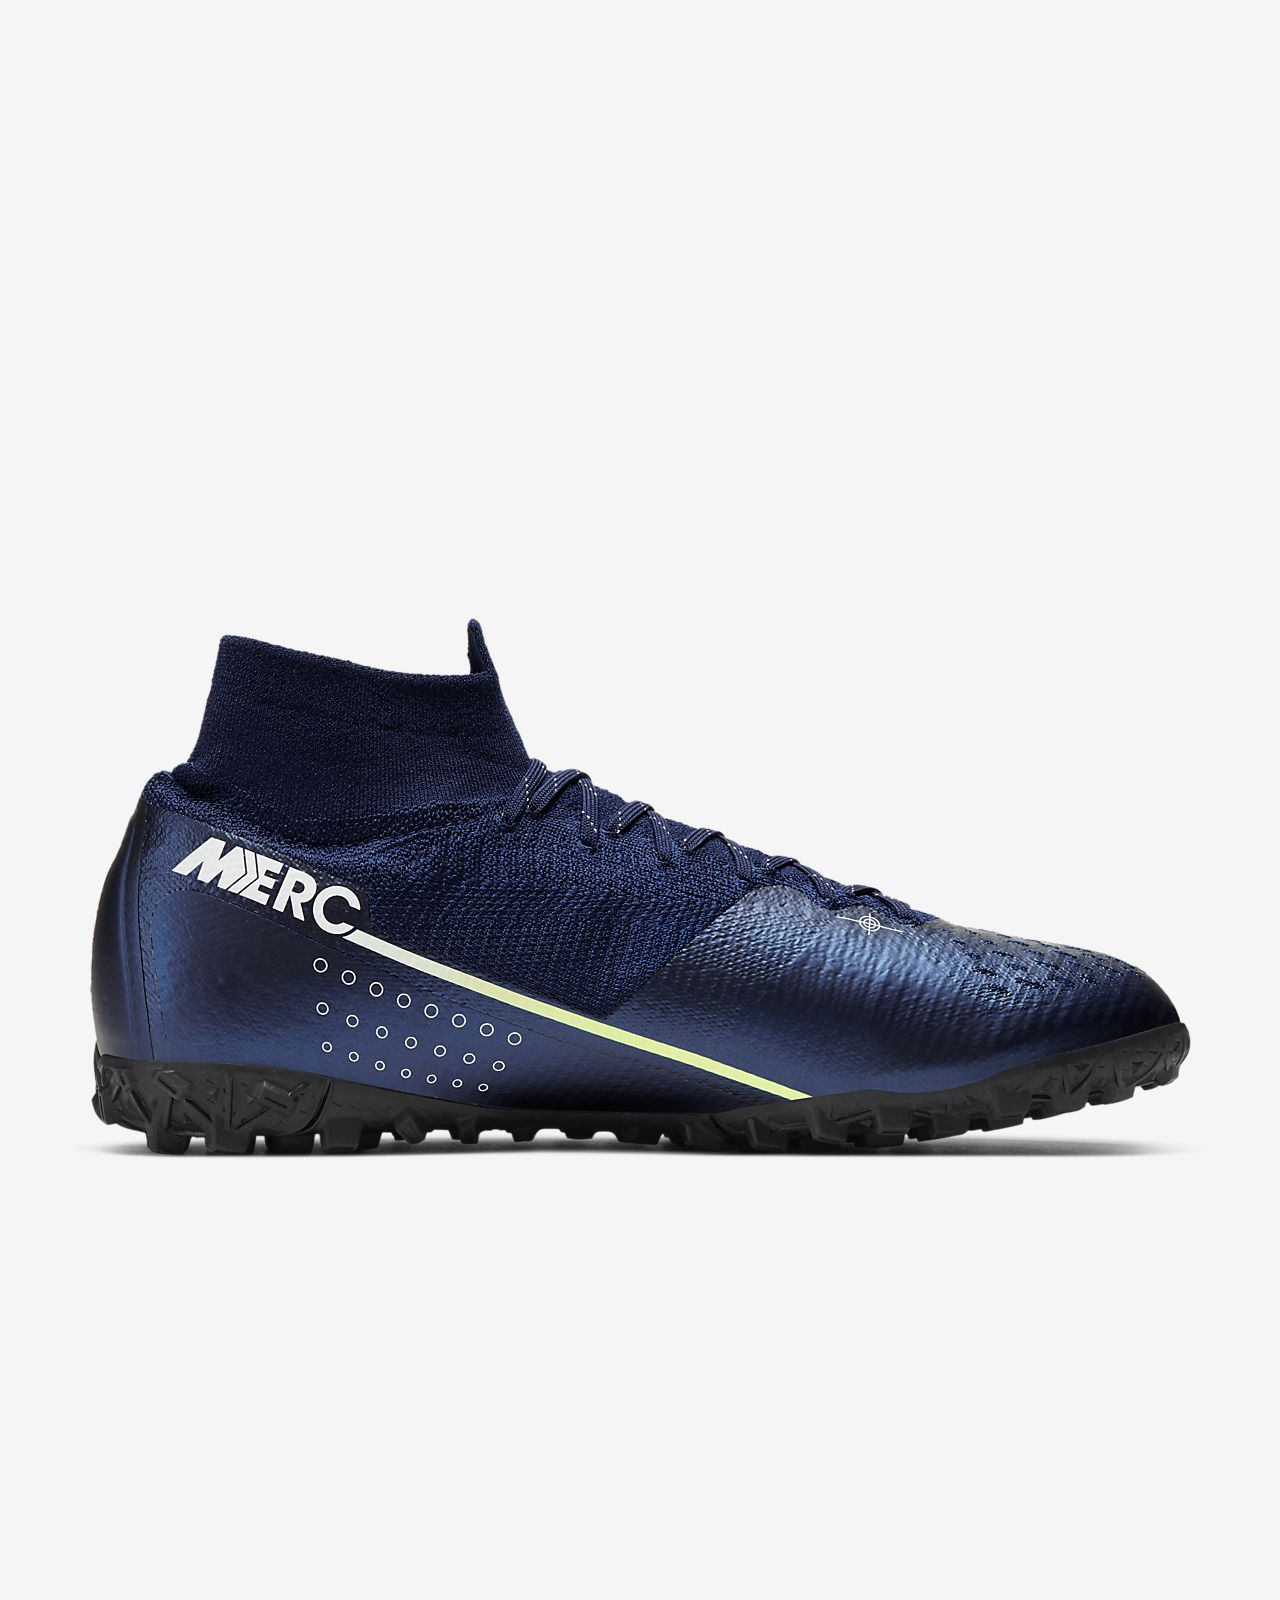 Nike Mercurial Superfly 7 Youth Academy FG Cleats.